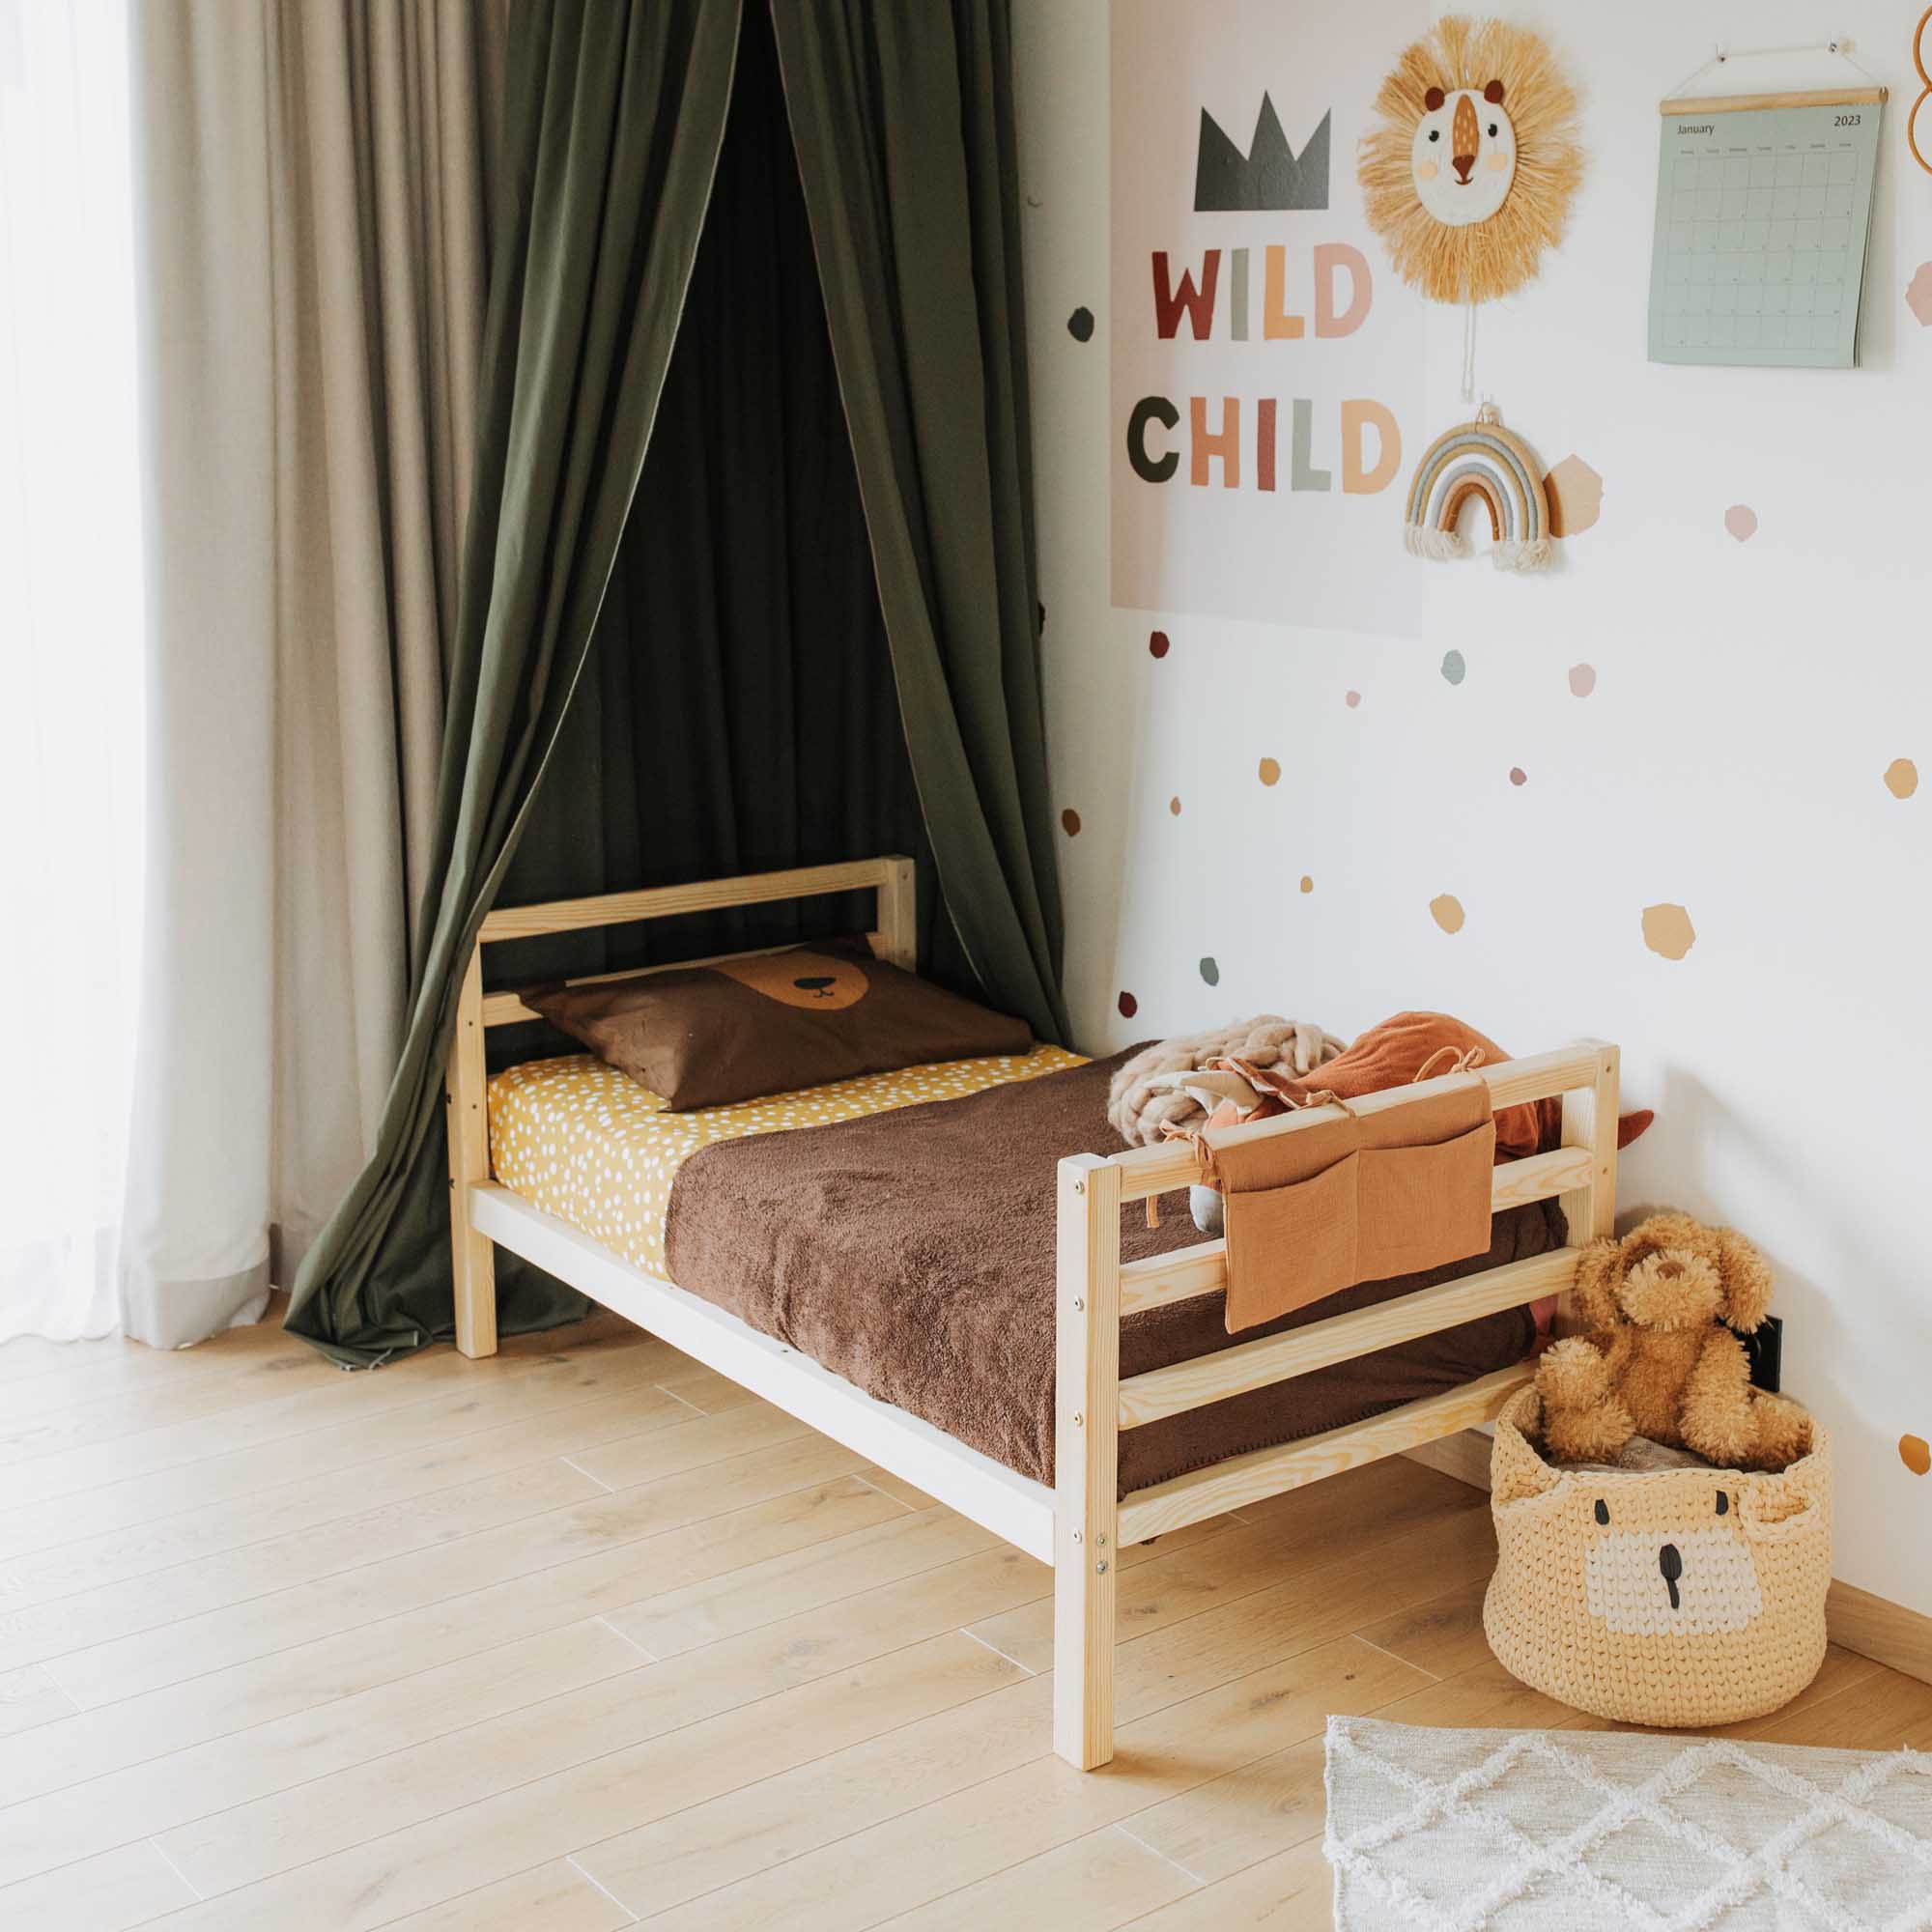 A child's room with teddy bears and a bed.